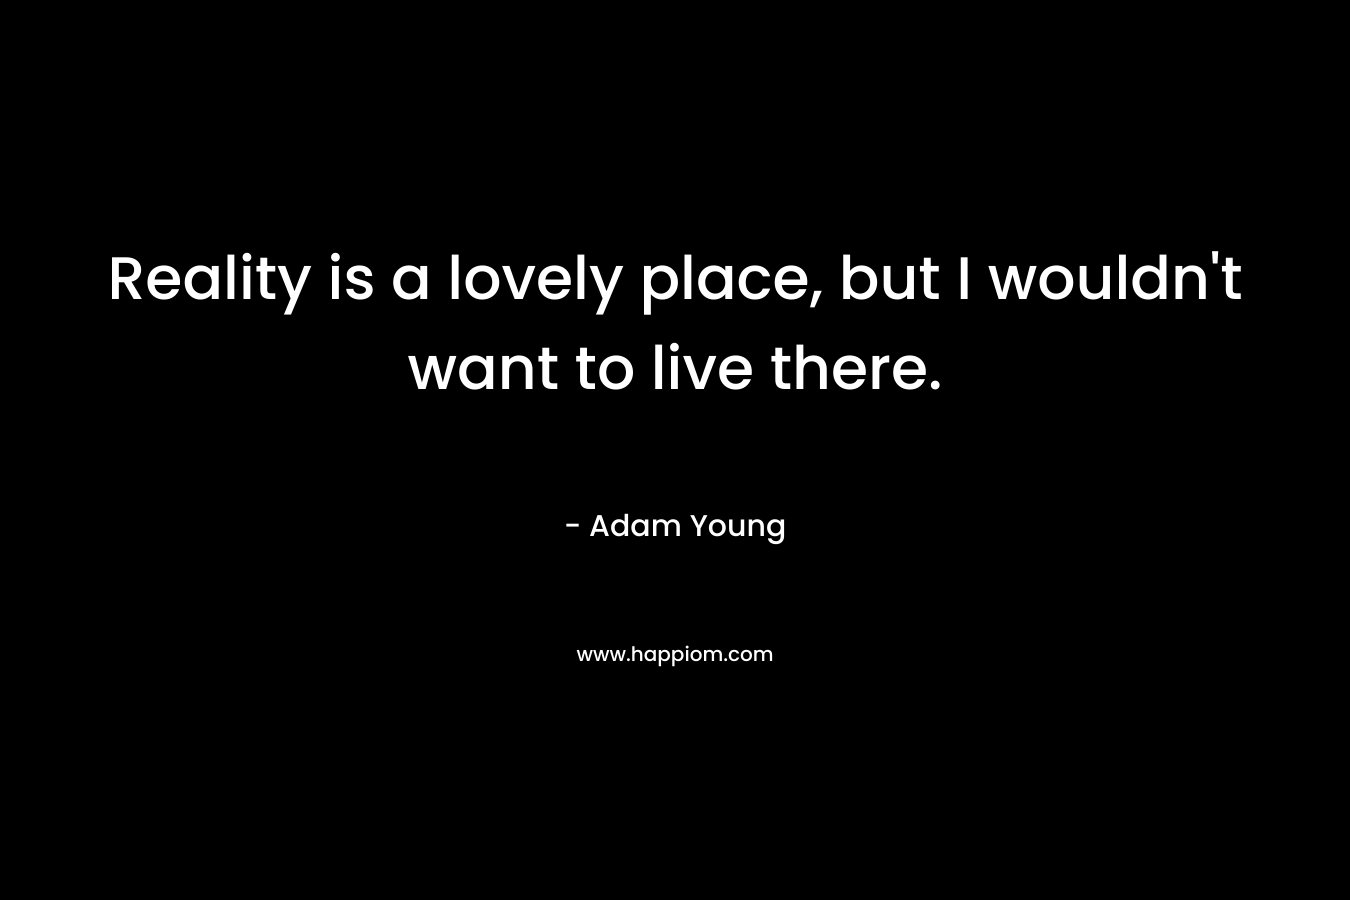 Reality is a lovely place, but I wouldn’t want to live there. – Adam Young